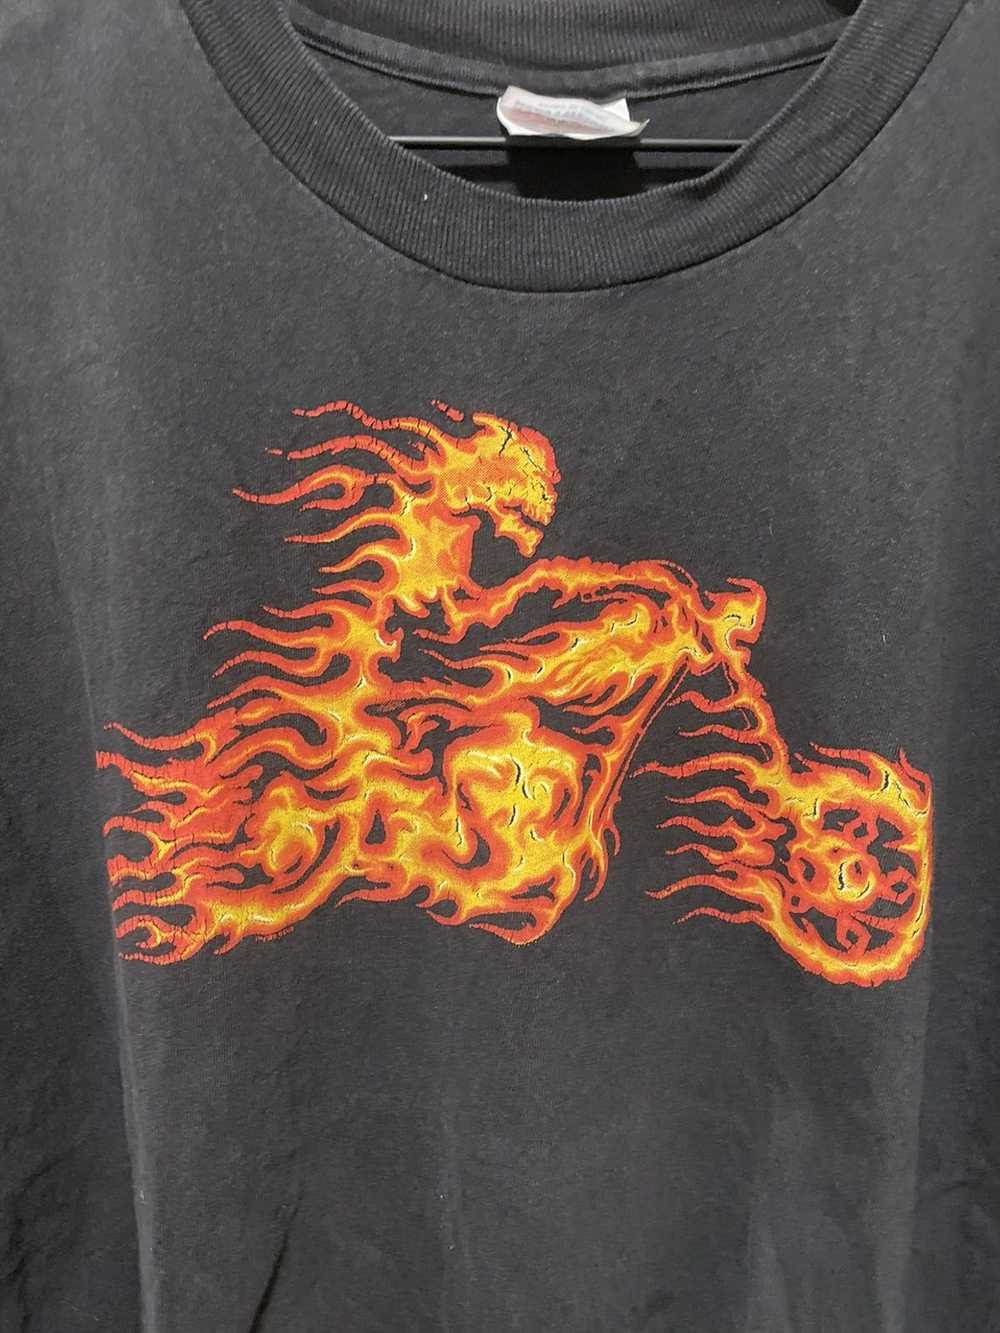 Vintage 90s GHOST RIDER T SHIRT | SINGLE STITCHED… - image 2